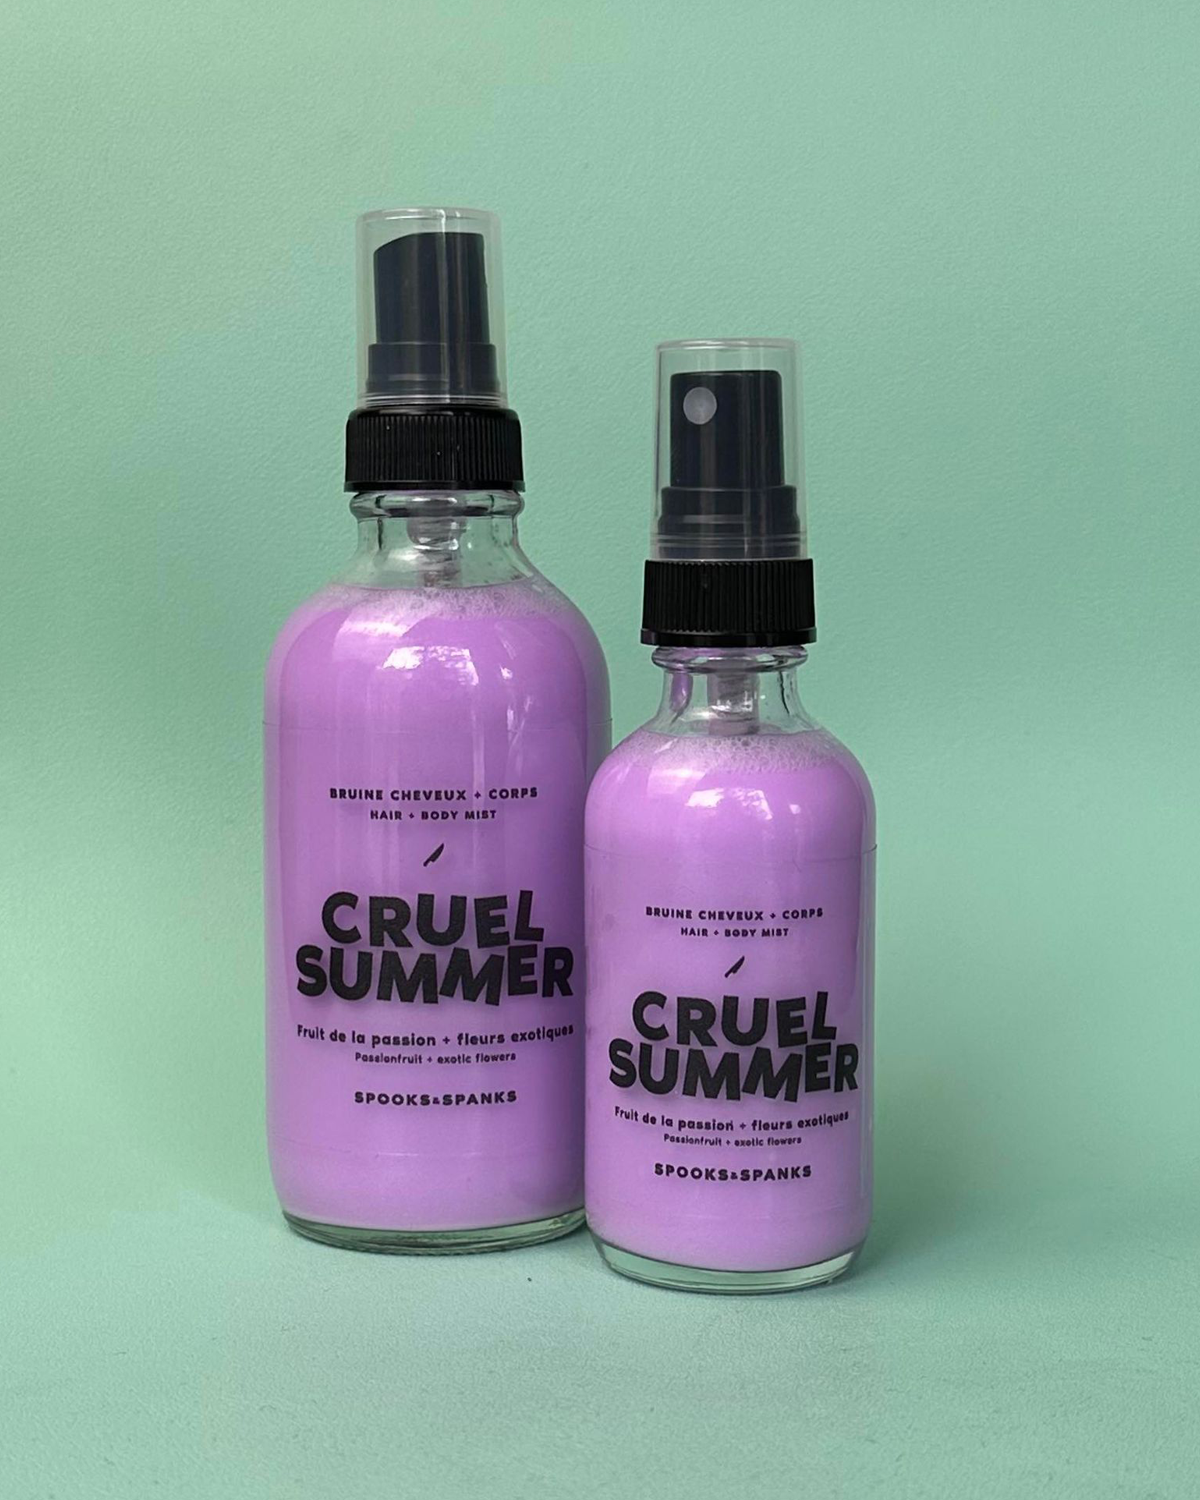 Cruel Summer passionfruit + exotic flowers Body and Hair Mist